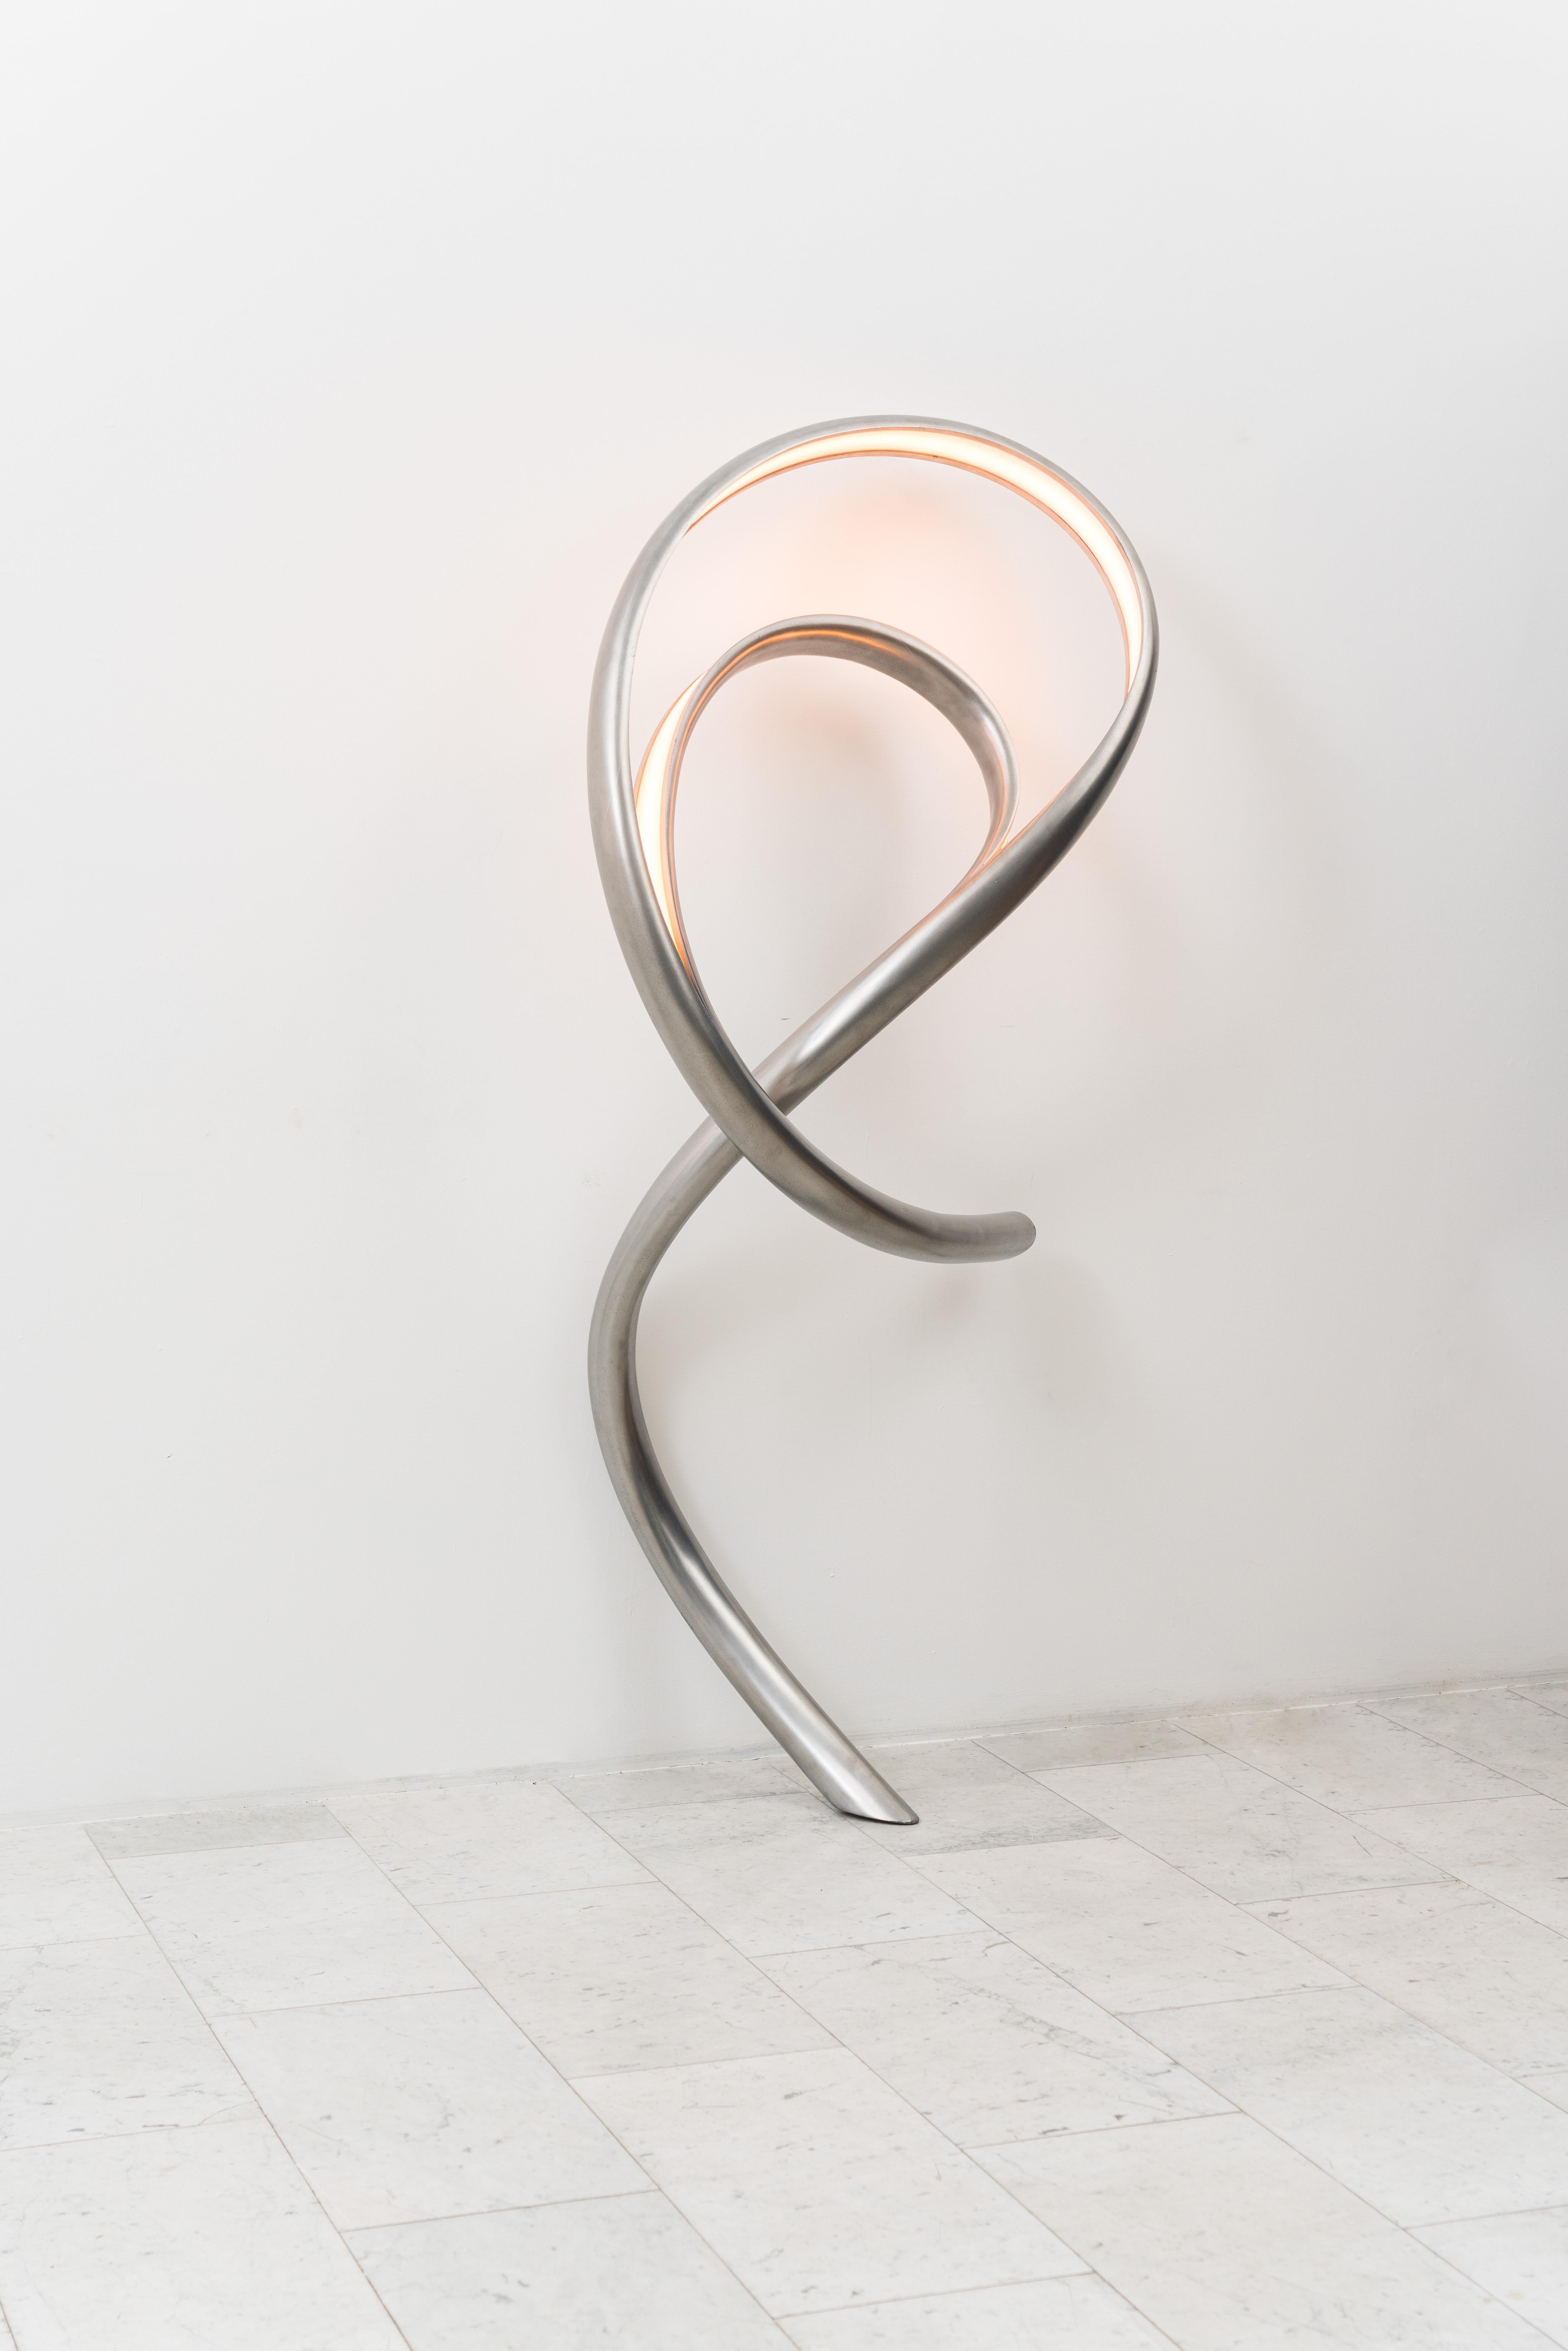 Procario’s sculptural lighting is composed of micro-laminated wood fused with LEDs. With a rough sketch in his mind, Procario freeform bends the wood into one of his signature undulating shapes. After months spent intentionally breaking wood,